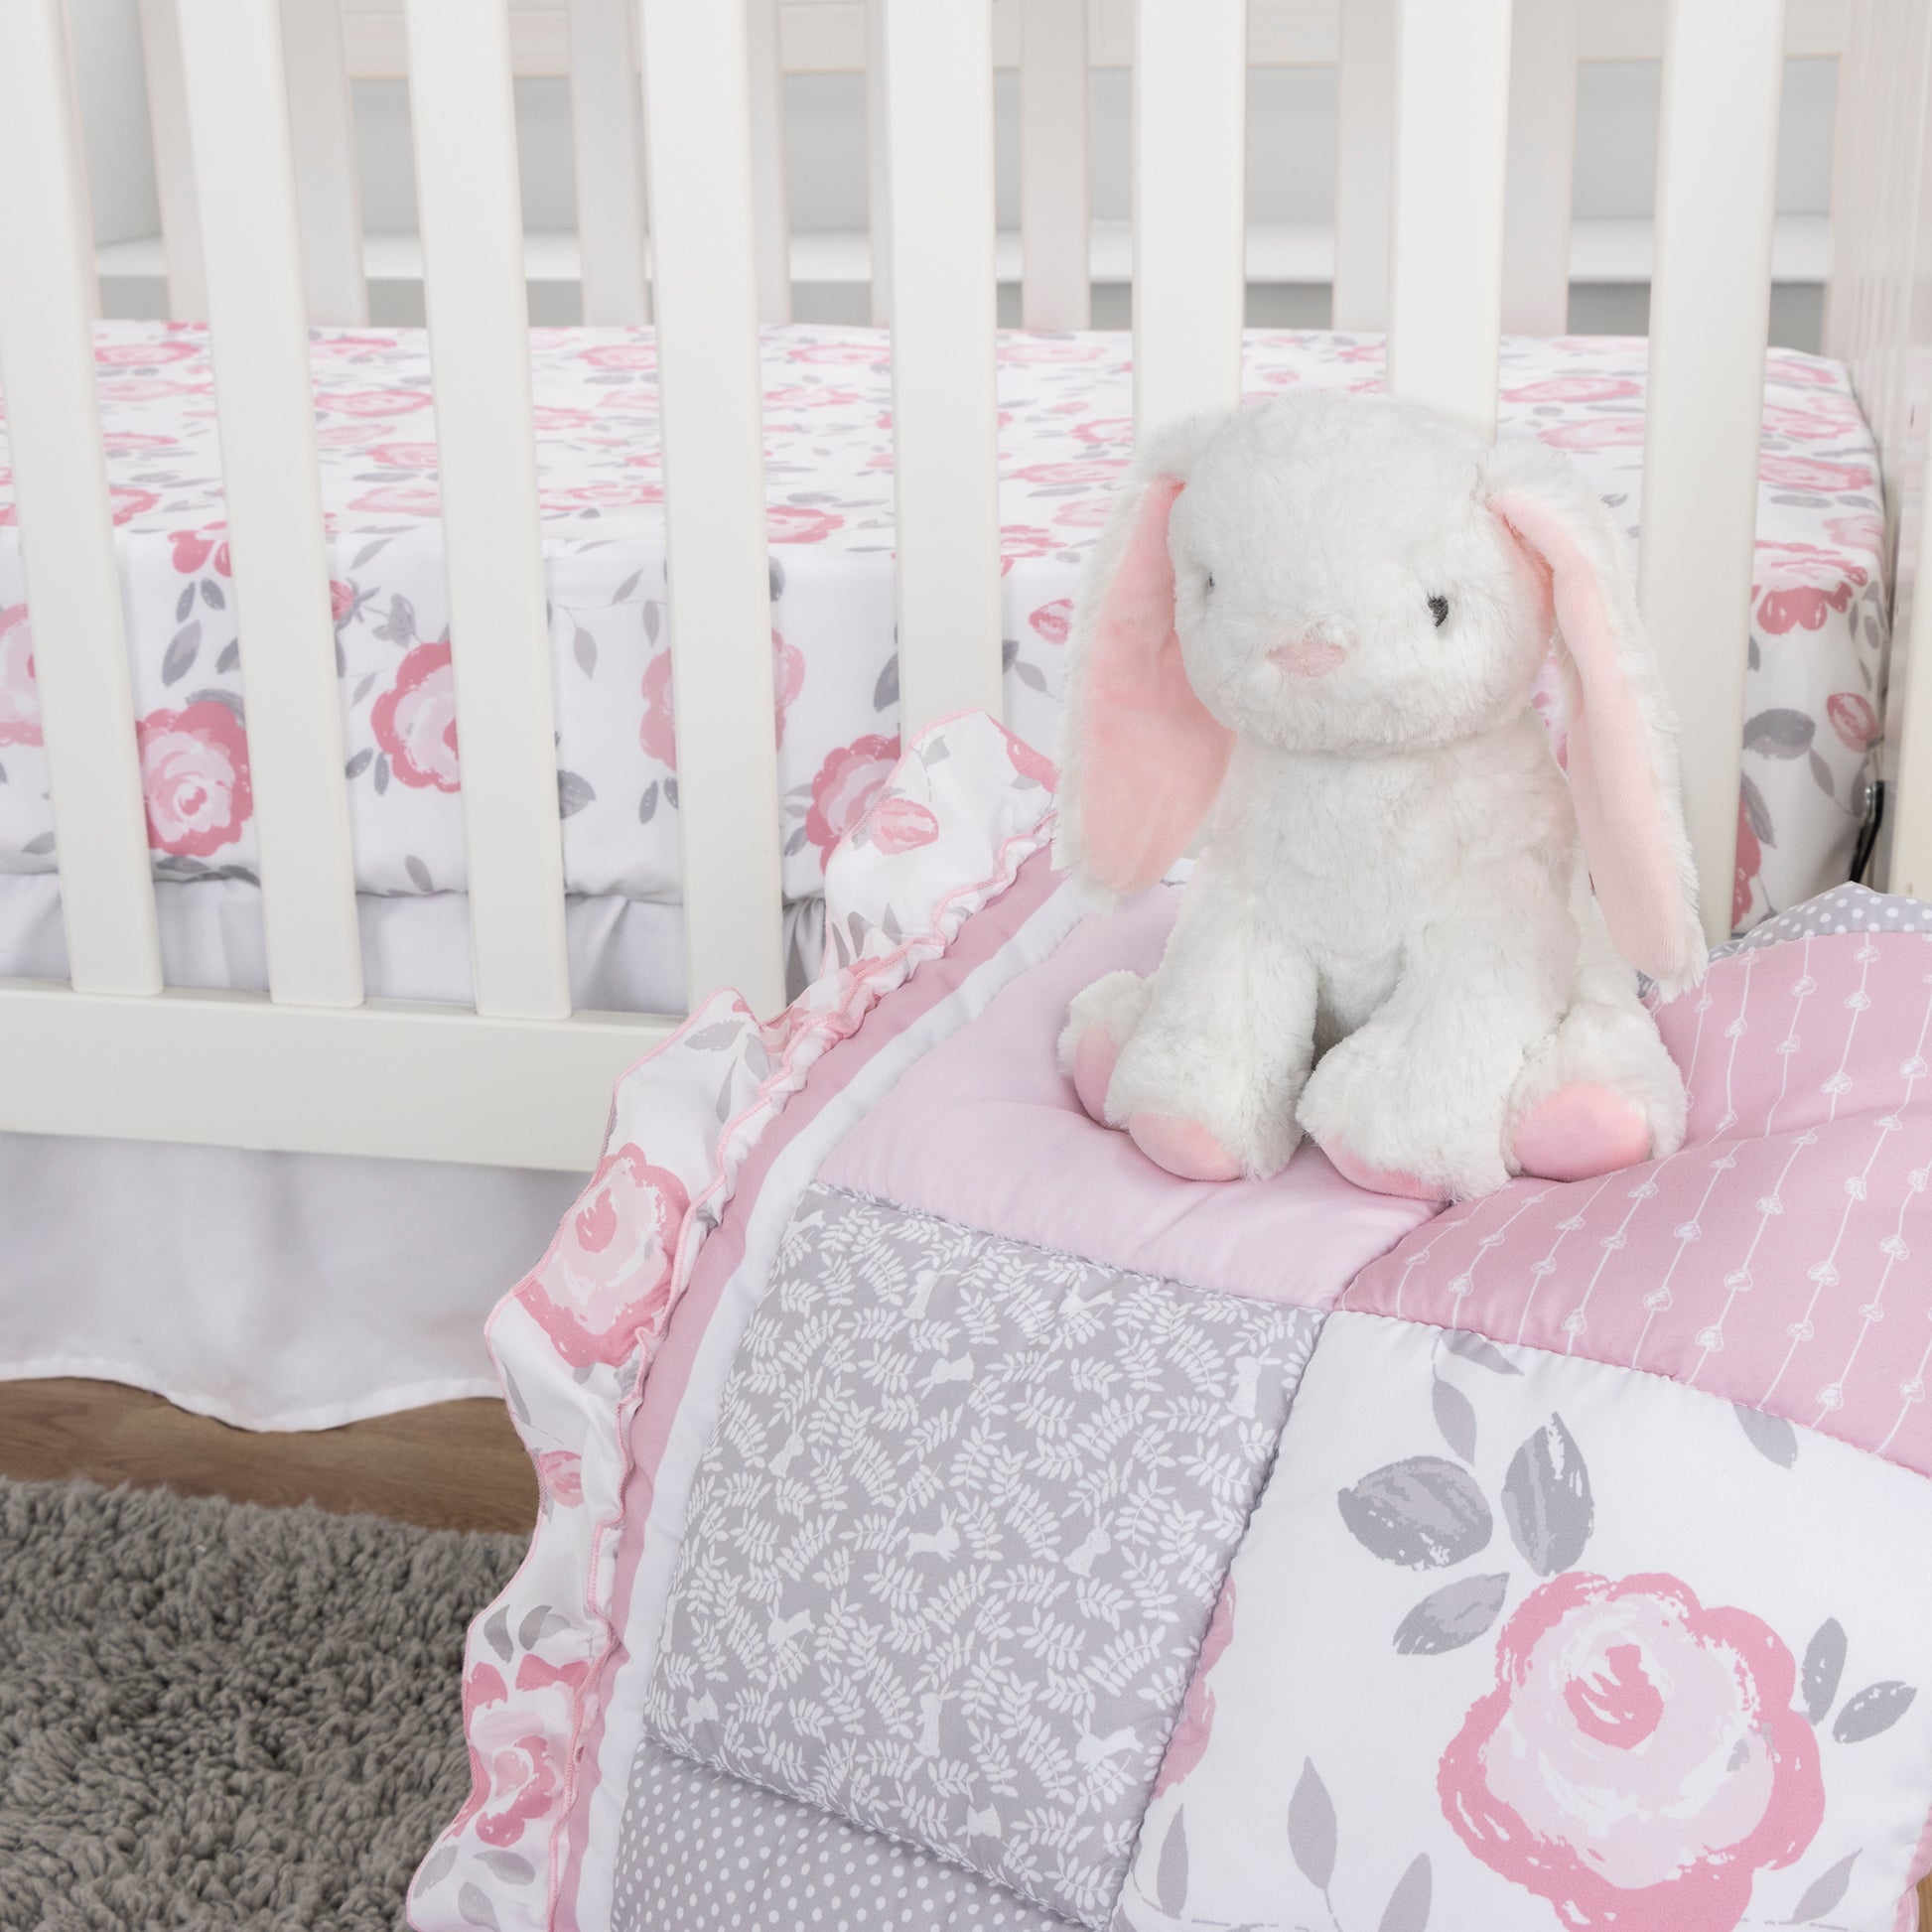 Emma 4 Piece Crib Bedding Collection by Sammy and Lou; stylized nursery image featuring adorable bunny plush and beautiful nursery quilt, crib sheet and crib skirt